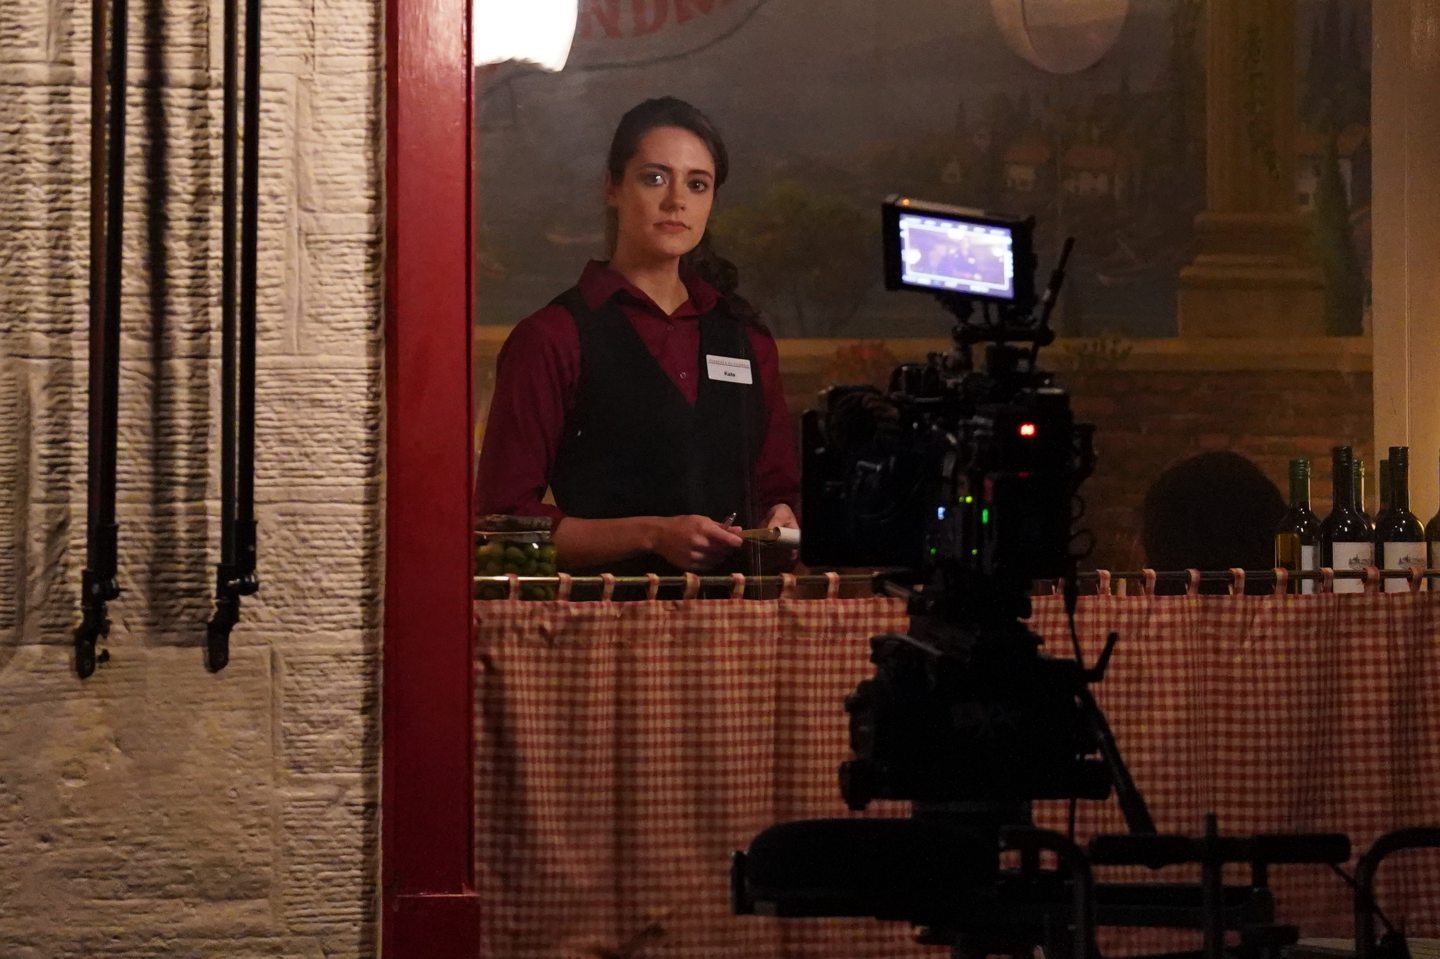 Kate Middleton (played by Meg Bellamy) working in the Pizzeria. Image: Andrew Milligan/PA Wire.